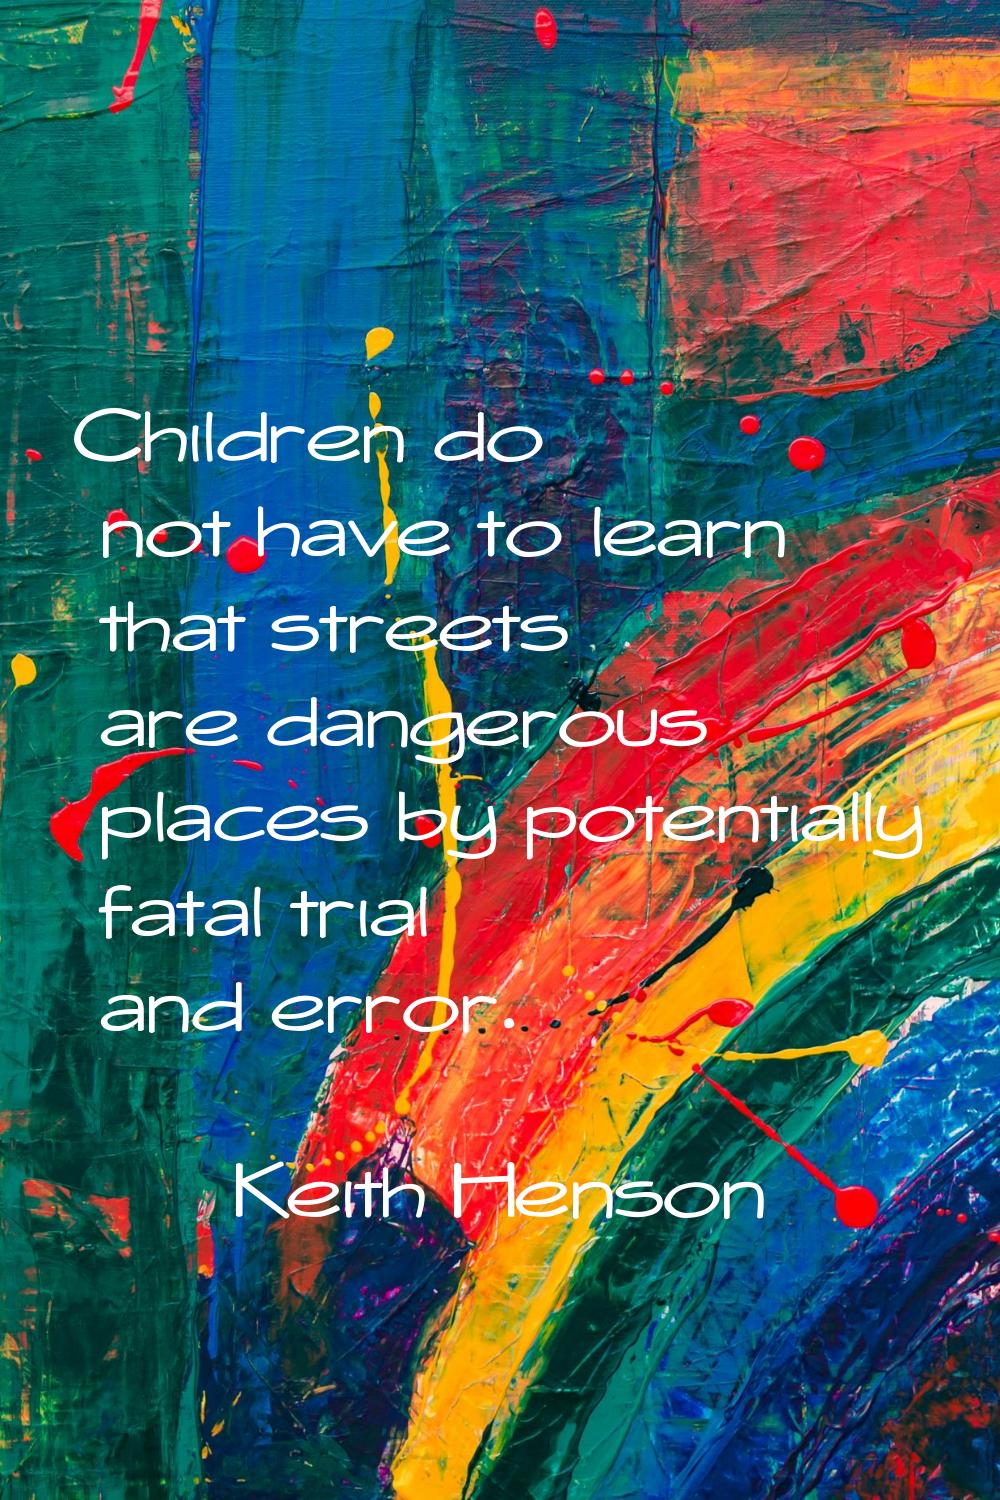 Children do not have to learn that streets are dangerous places by potentially fatal trial and erro